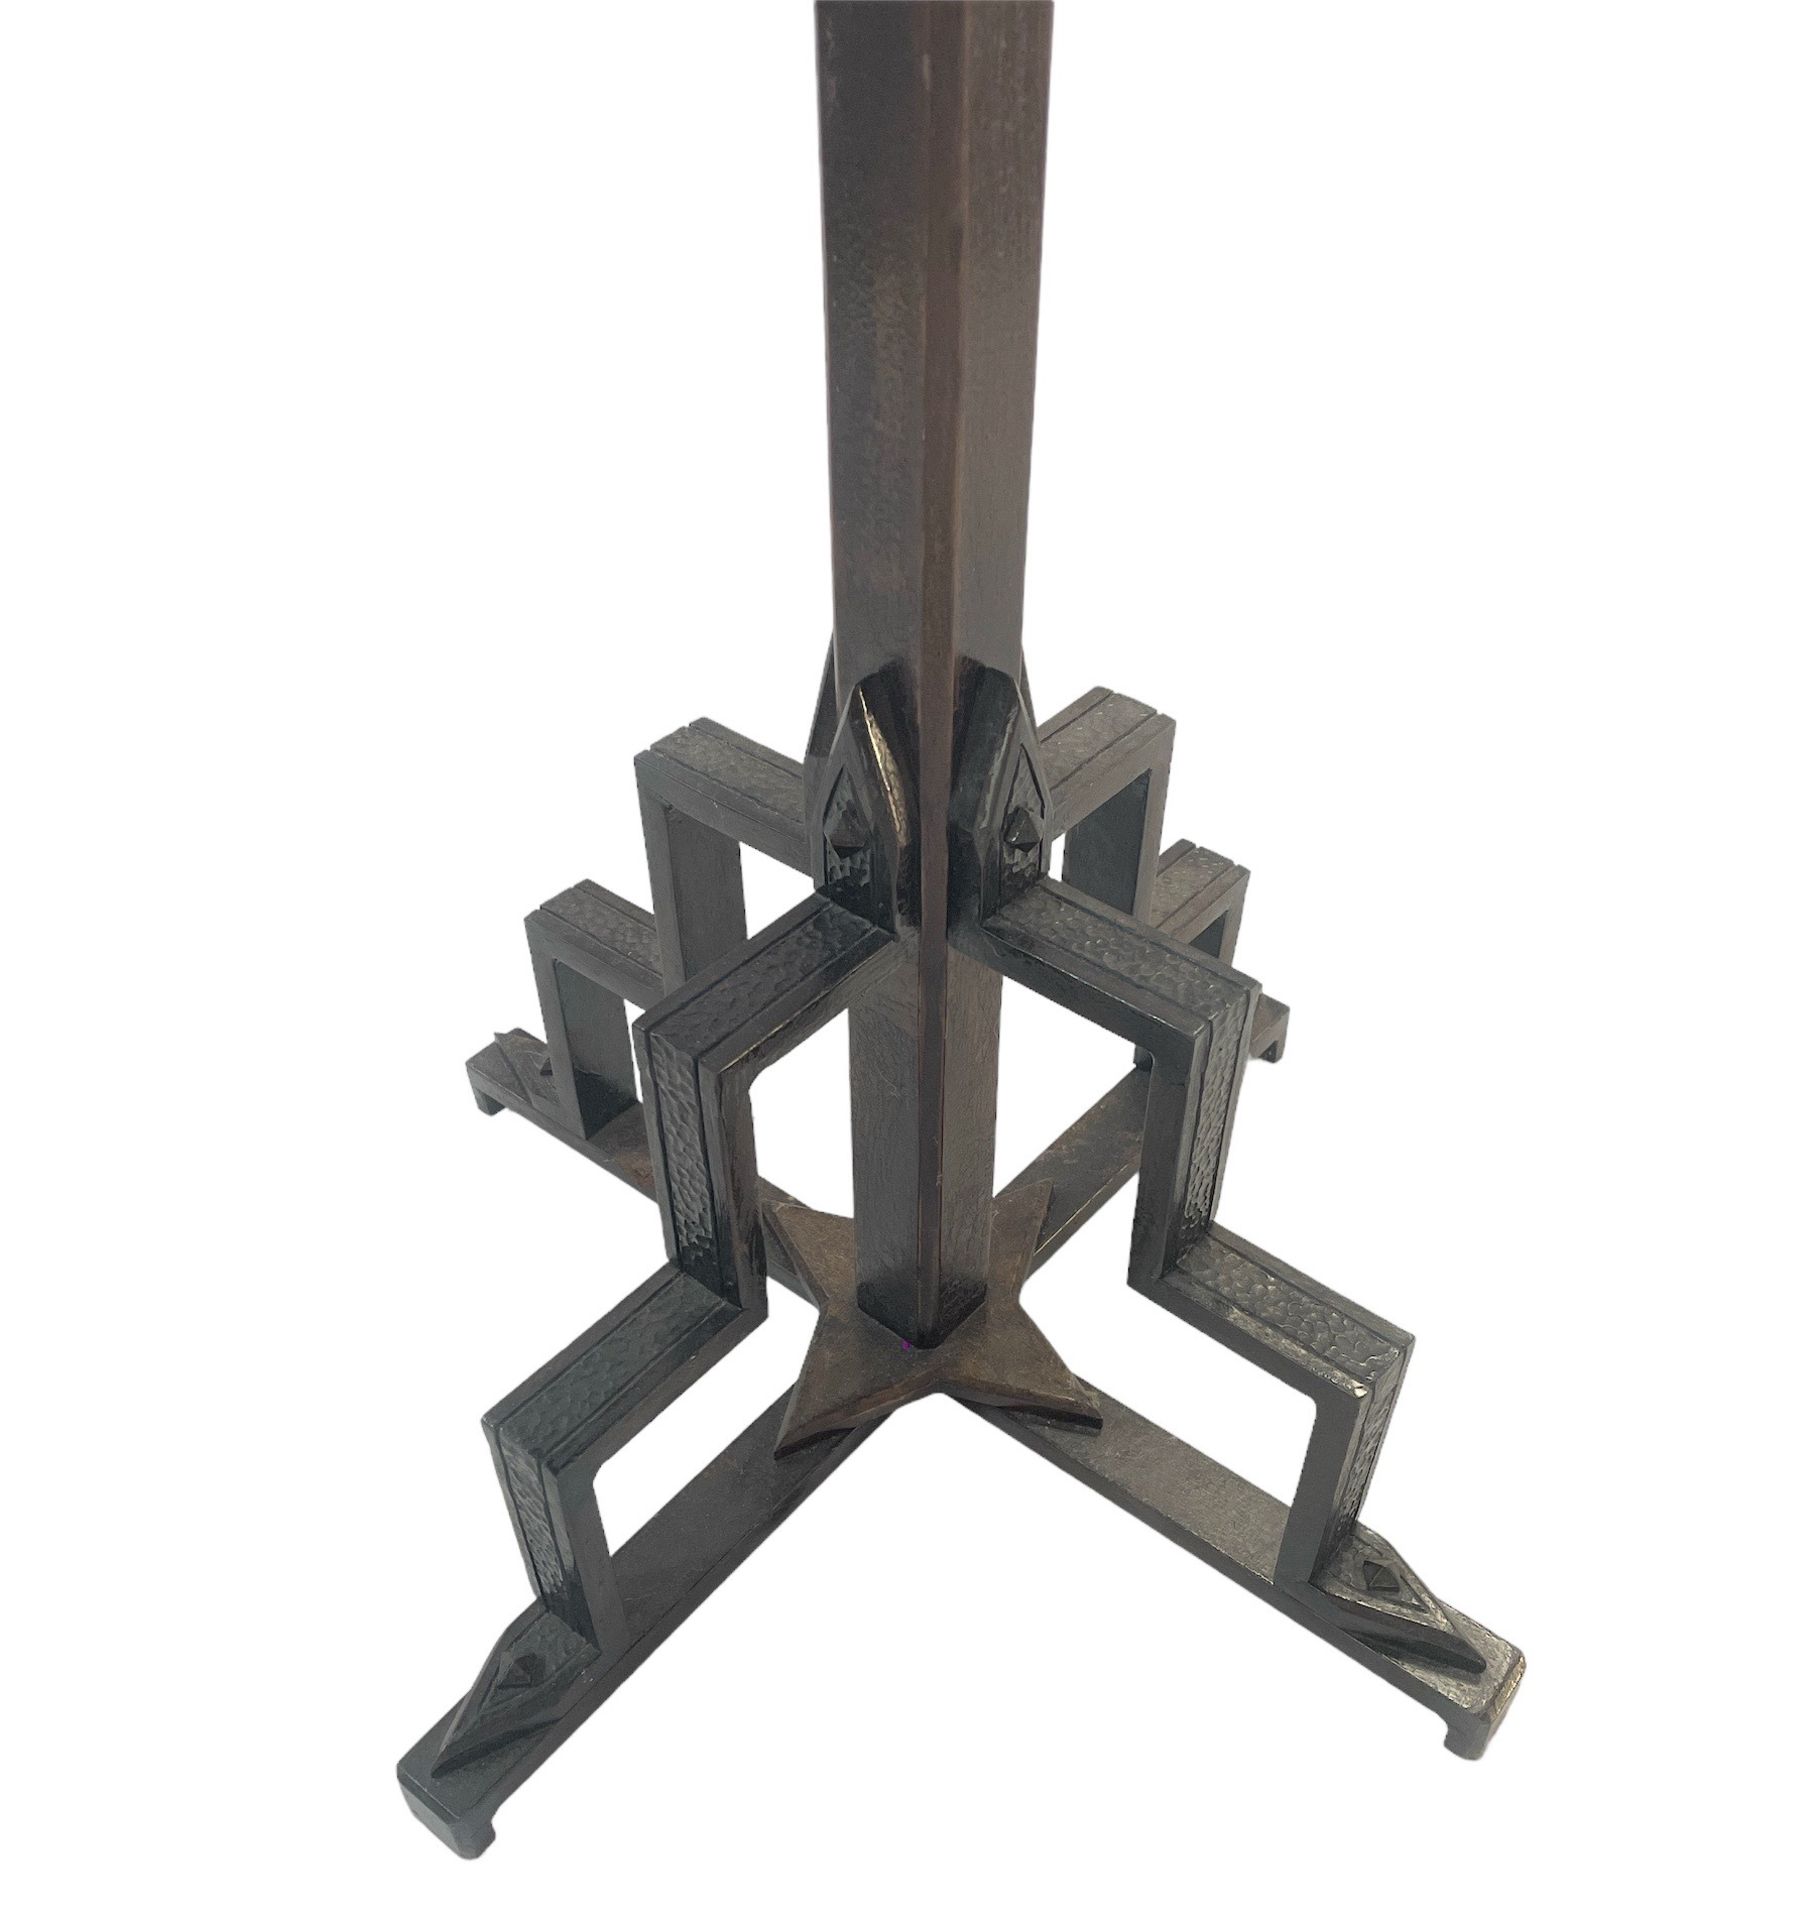 Wrought iron pedestal table, French Art Deco work from 1930 - Image 2 of 2